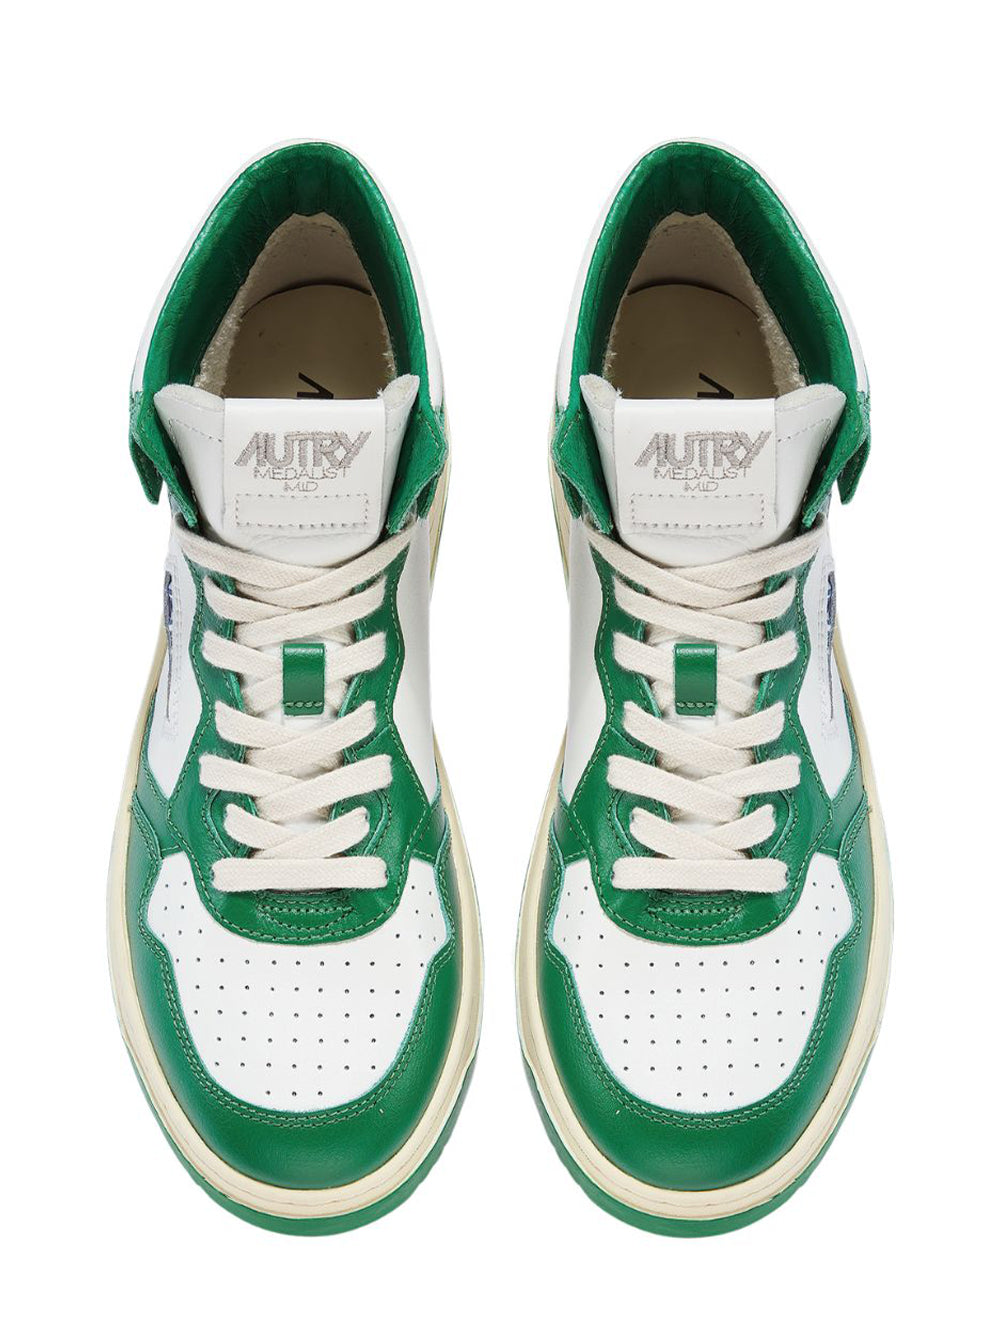 Medalist Mid Sneakers In Two-Tone Leather Color (White And Green) (Men)